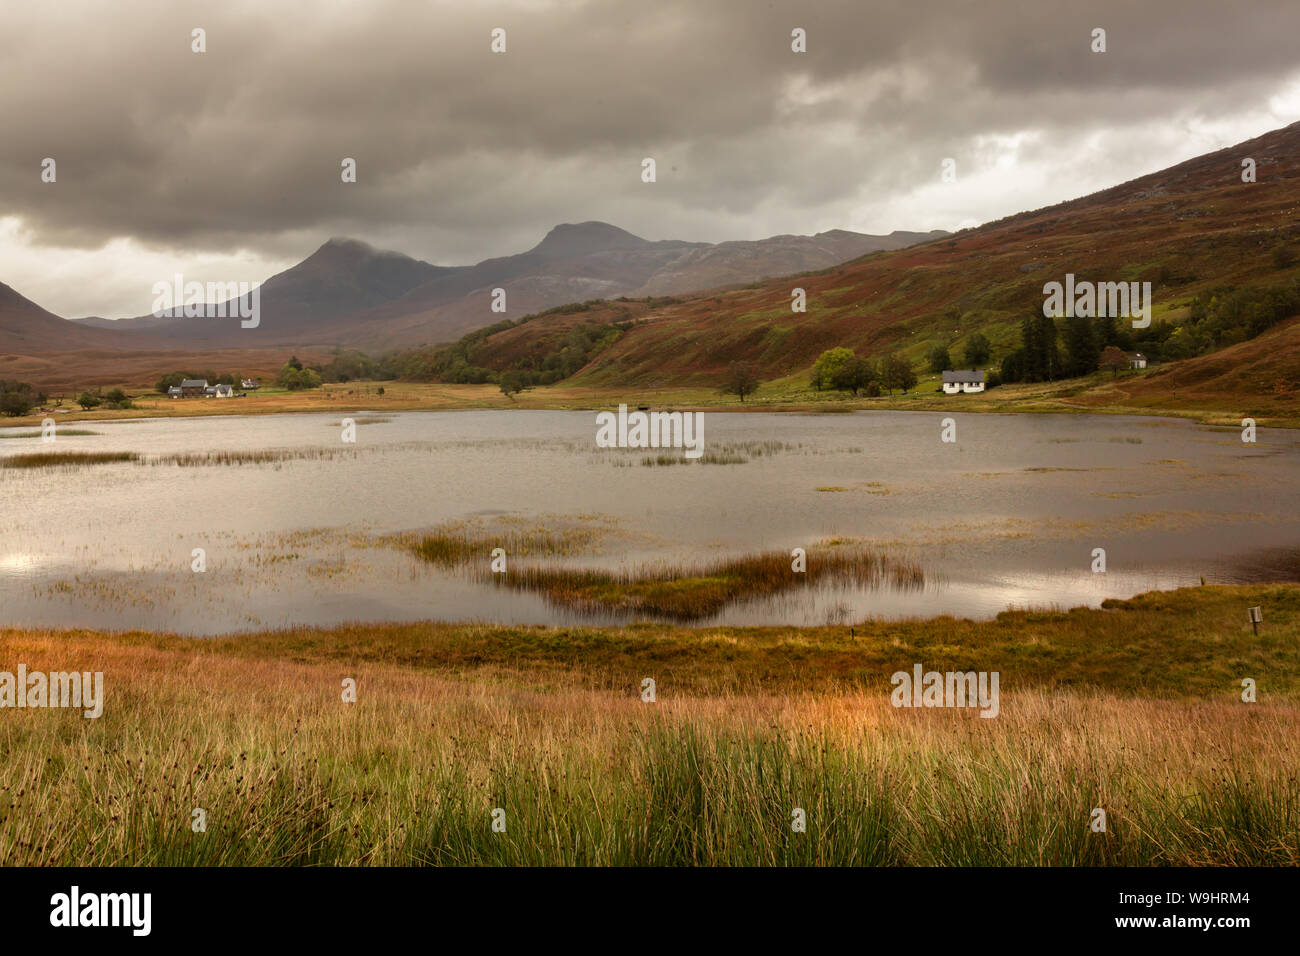 Small Scottish  white farmhouse or cottage on far bank of the Loch surrounded by mountains, trees and grass Stock Photo